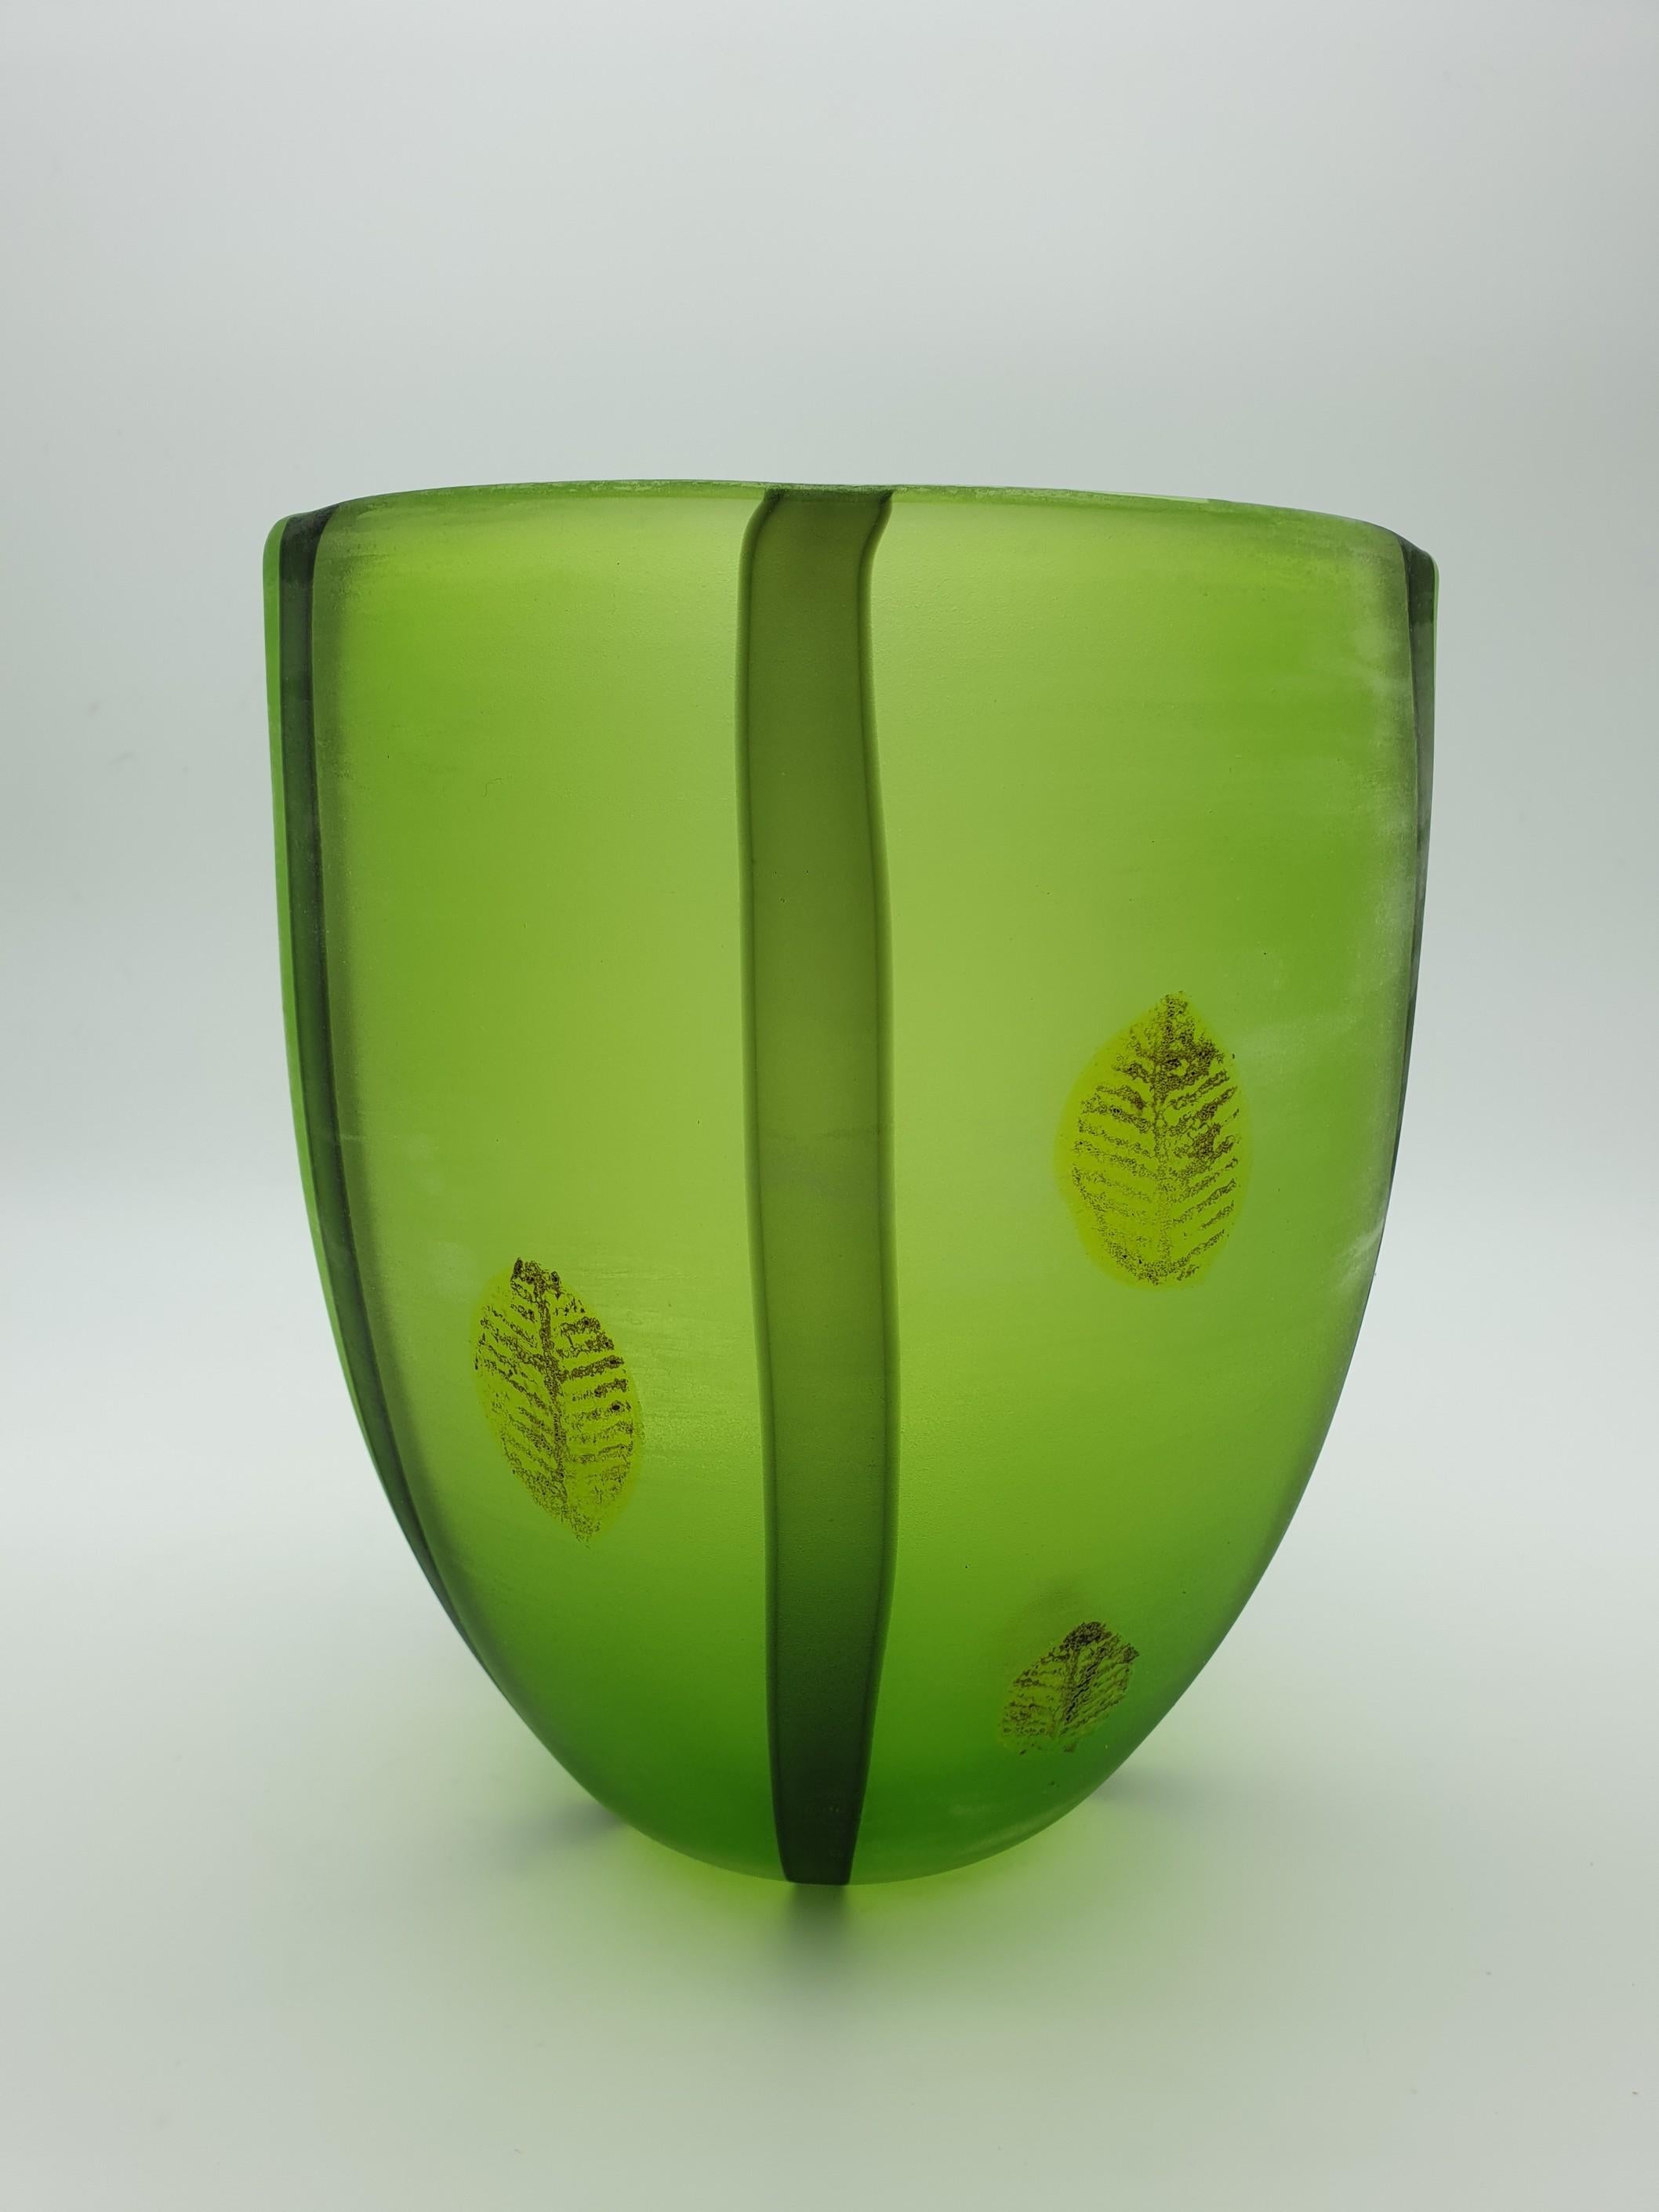 Italian Modern Large Murano Glass Vase with Leaves in Sabbiato Finish, by Cenedese, 1988 For Sale